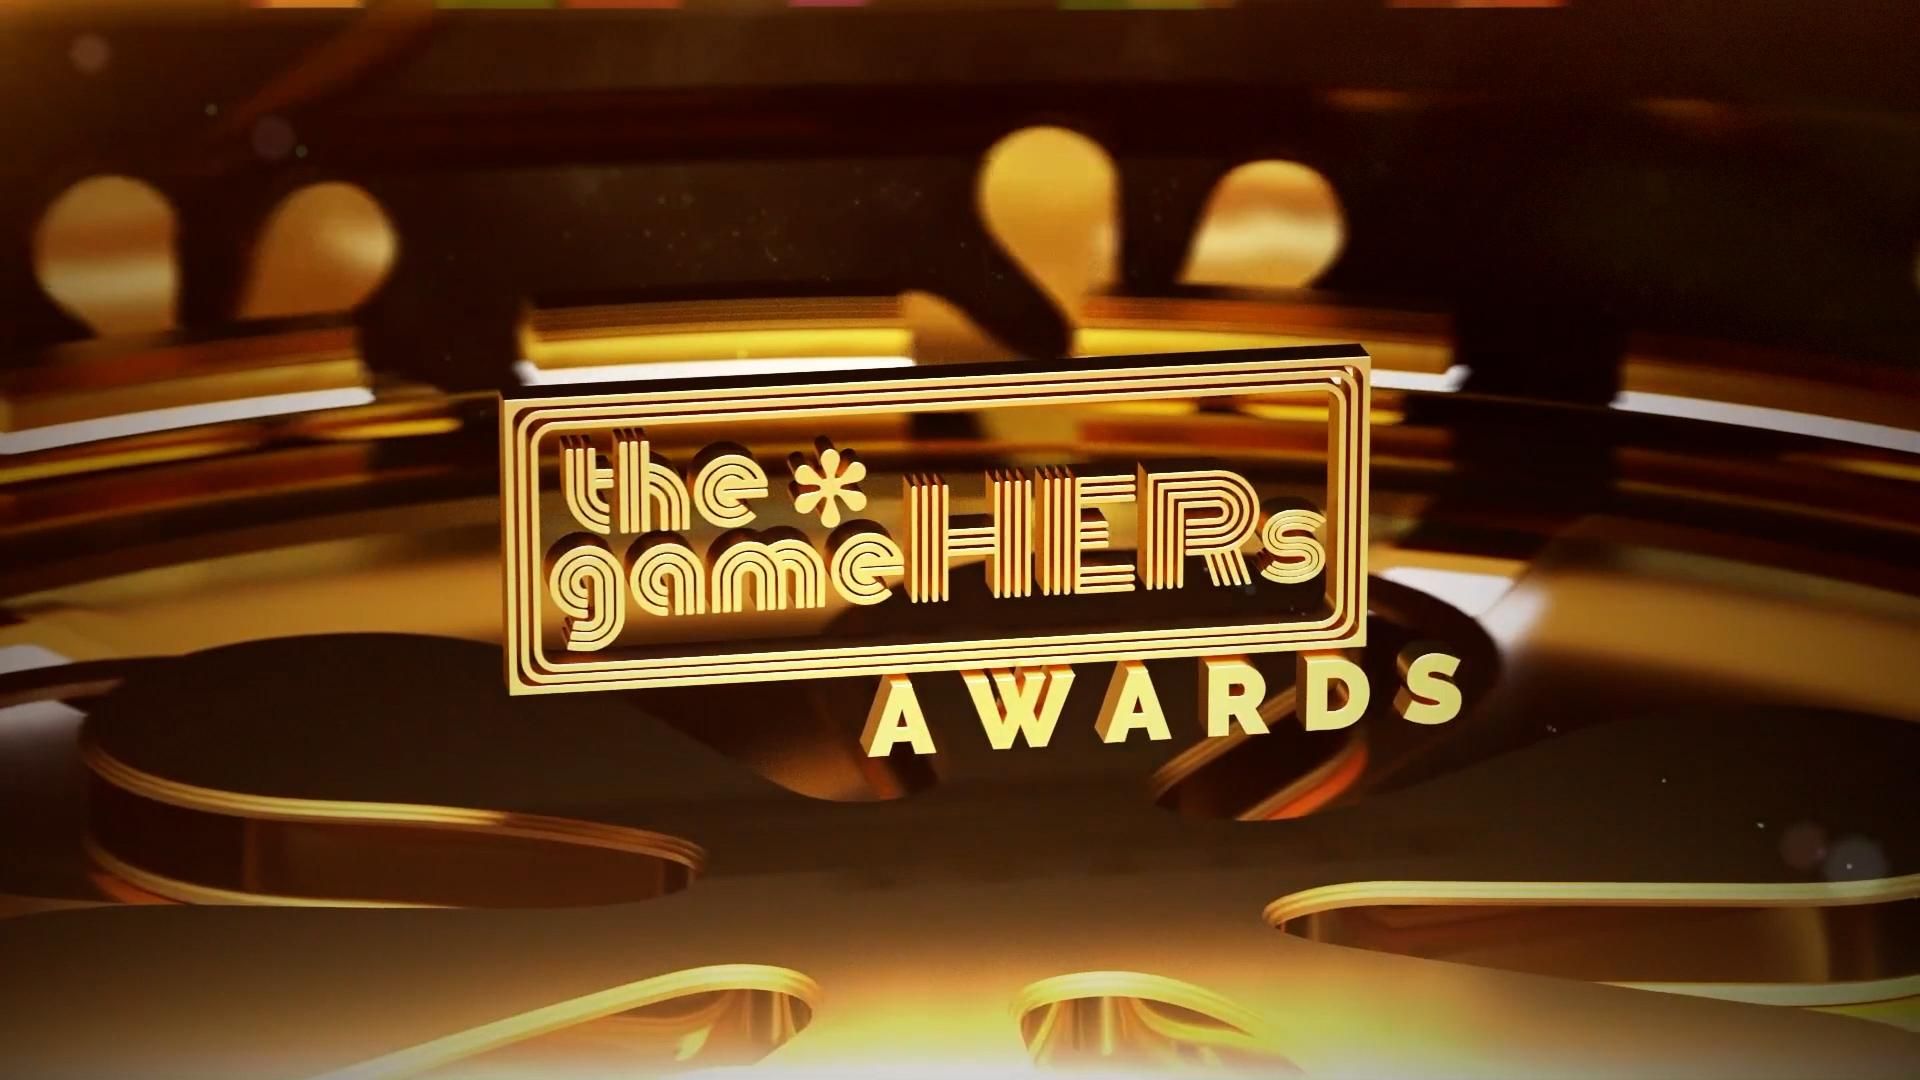 The*gameHERs awards